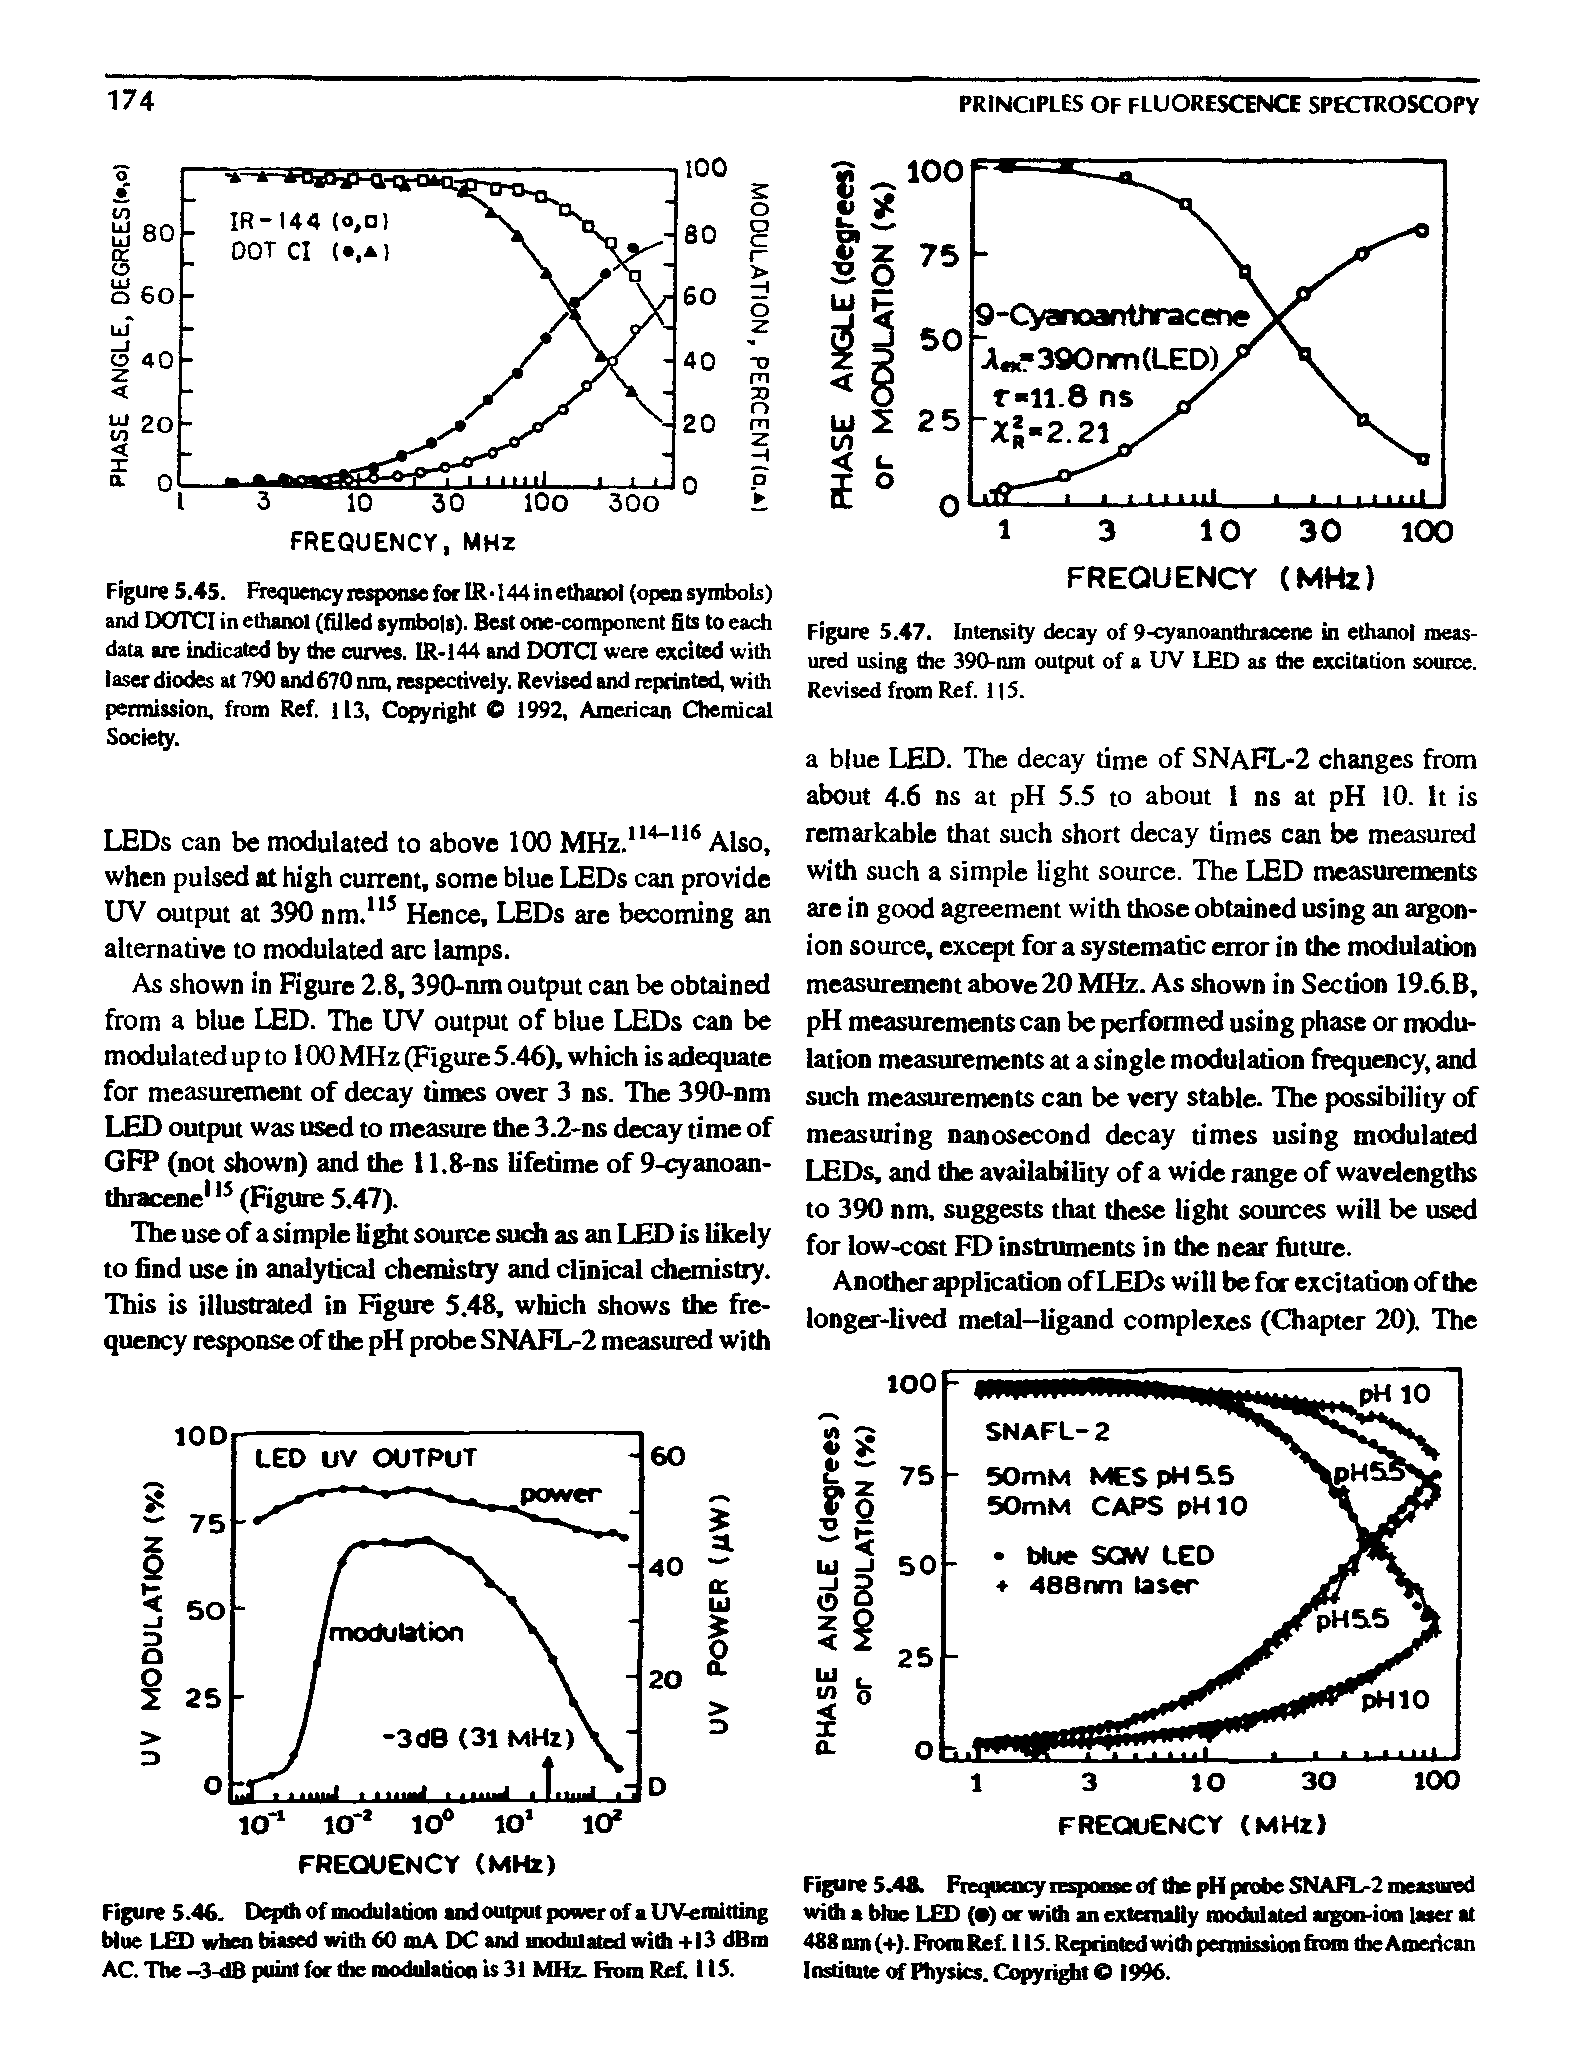 Figure 5.47. Intensity dec of 9<yanoanthracmie in ethanol measured usii ( the 390-nm output of a UV LED as the ezeitation source. Revised from Ref. 115.